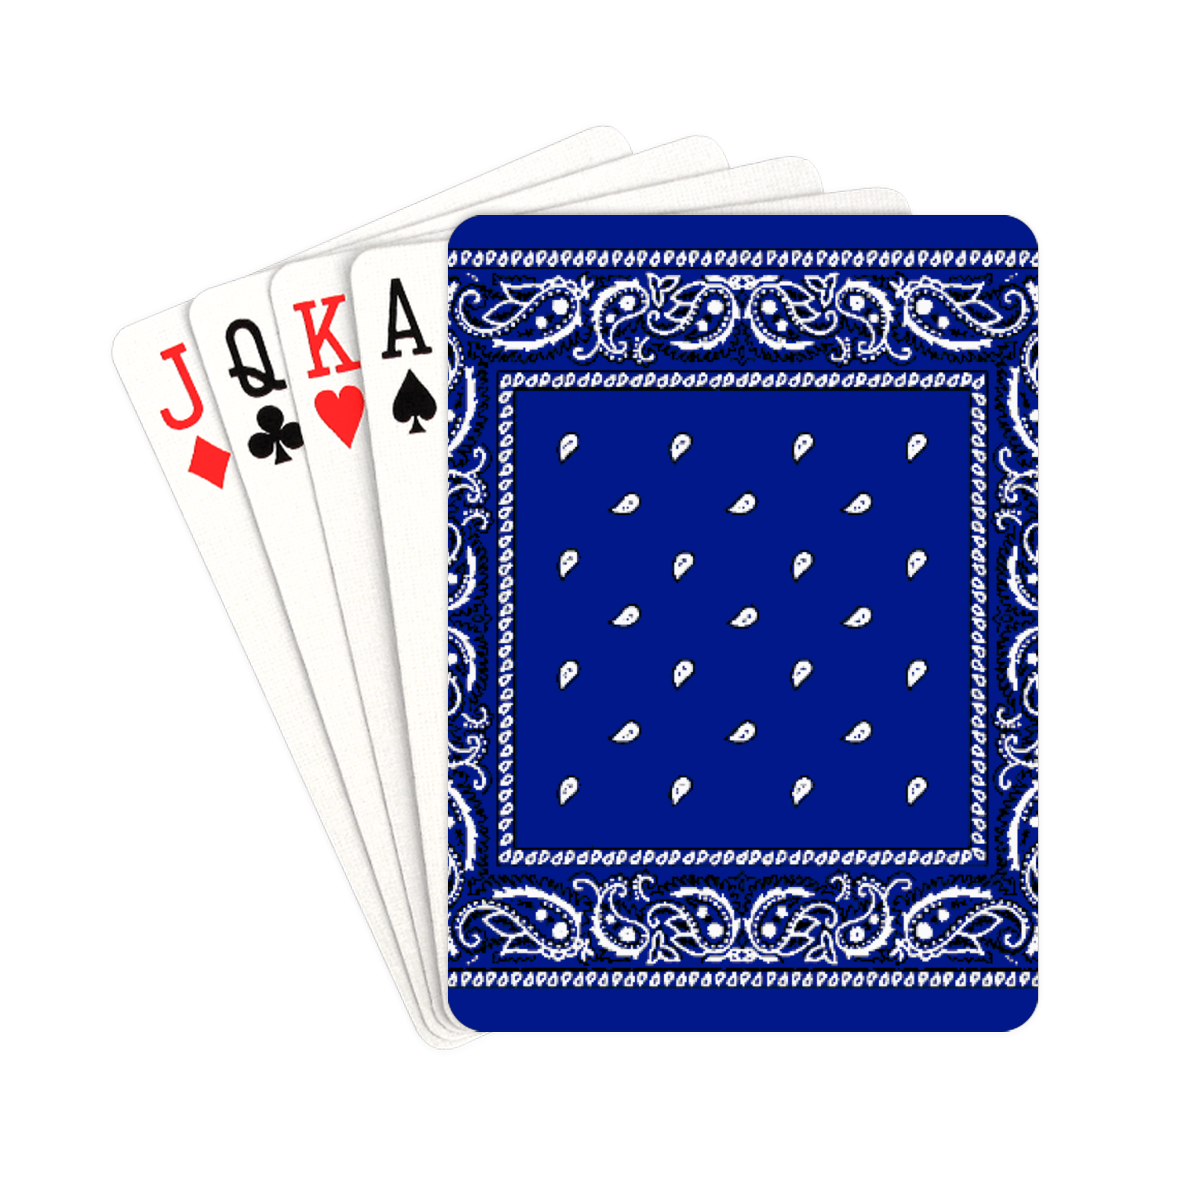 KERCHIEF PATTERN BLUE Playing Cards 2.5"x3.5"